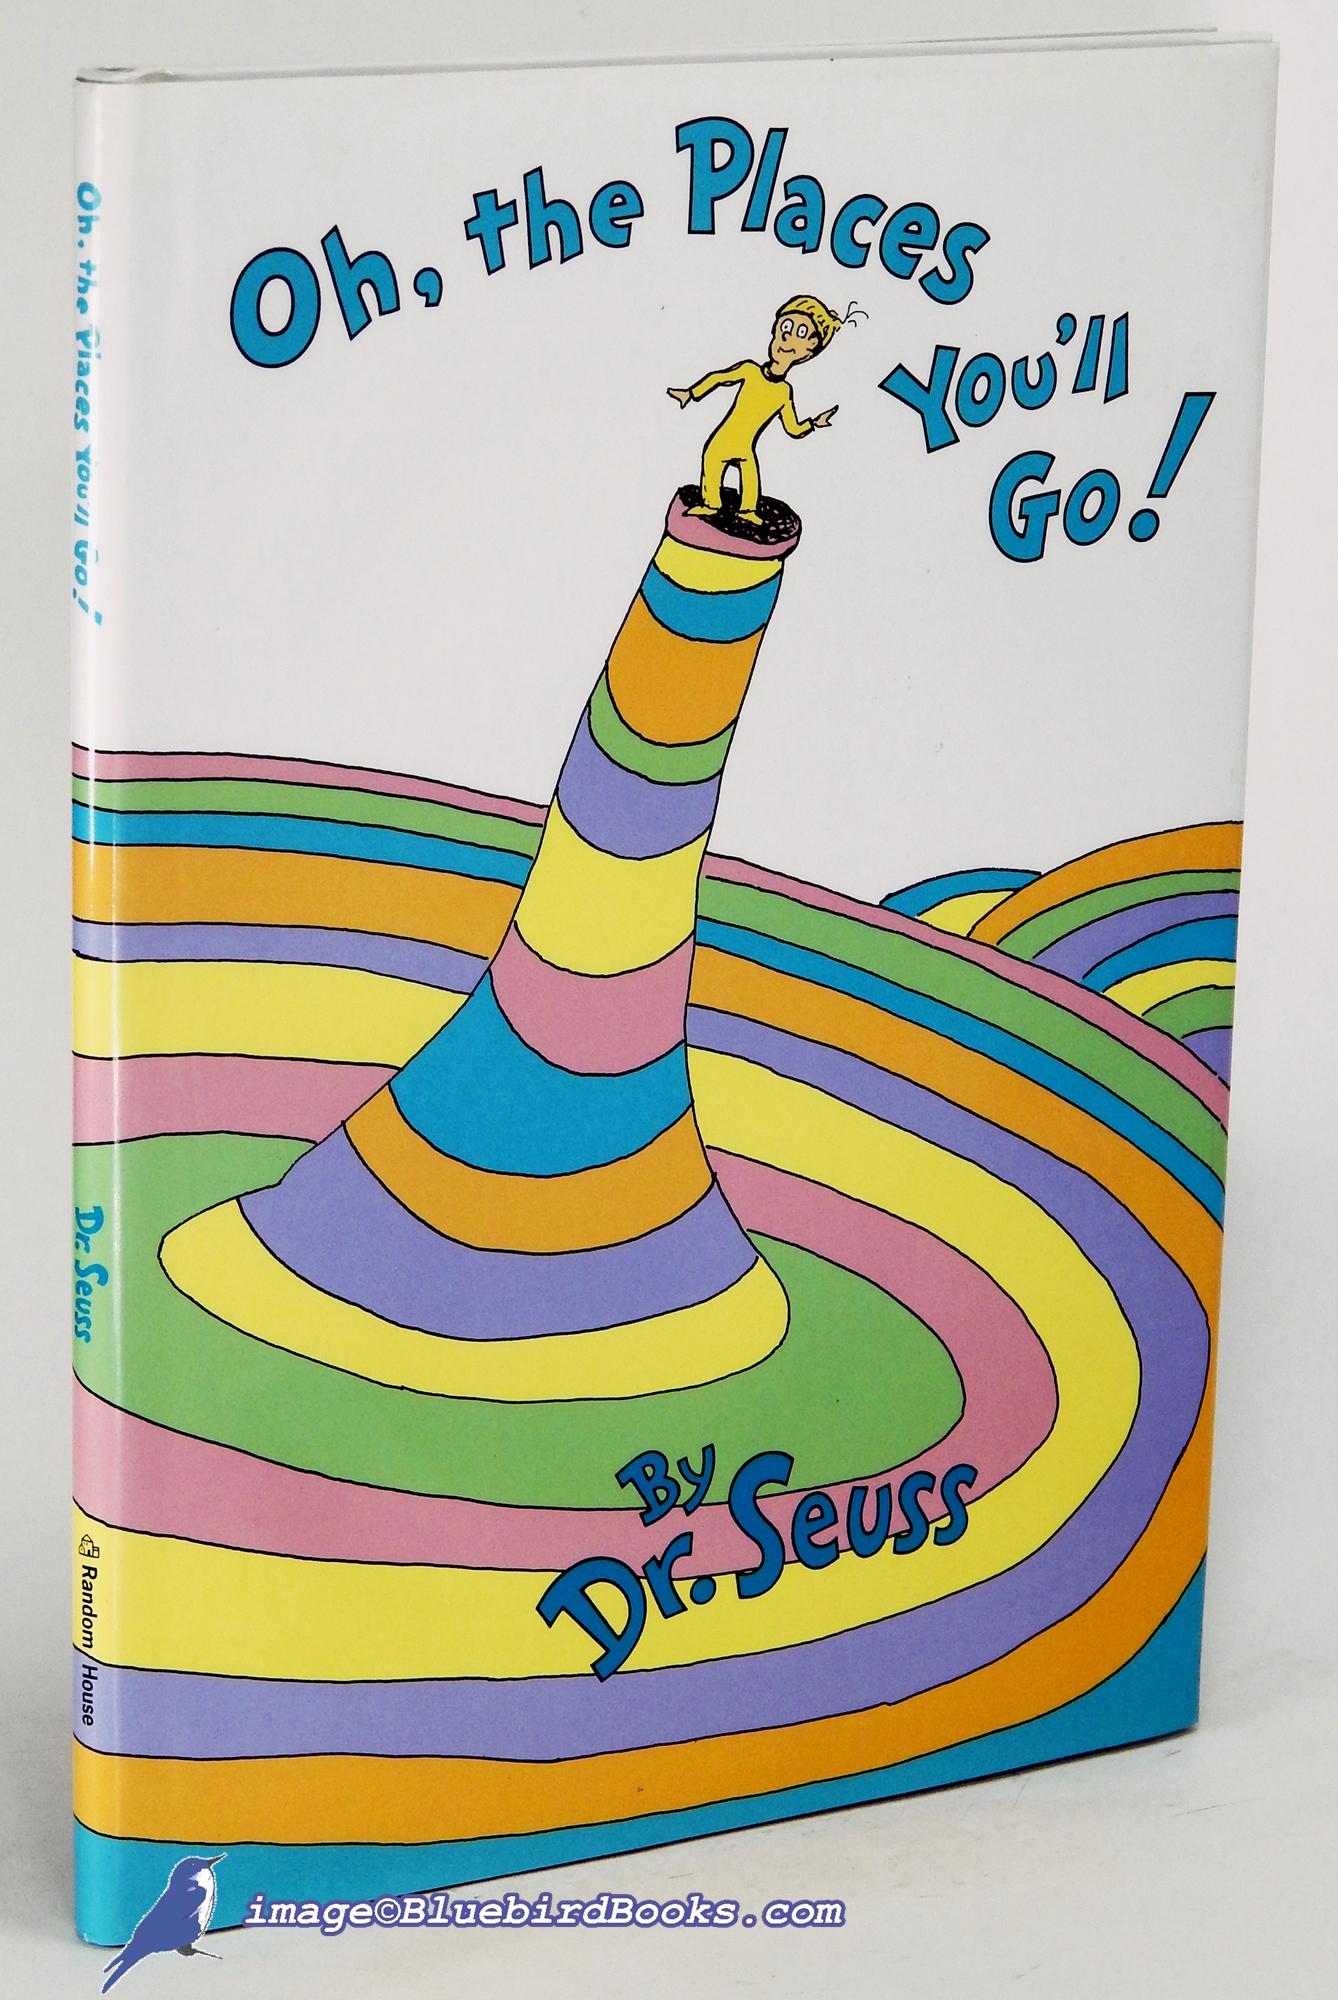 SEUSS, DR. - Oh, the Places You'LL Go!